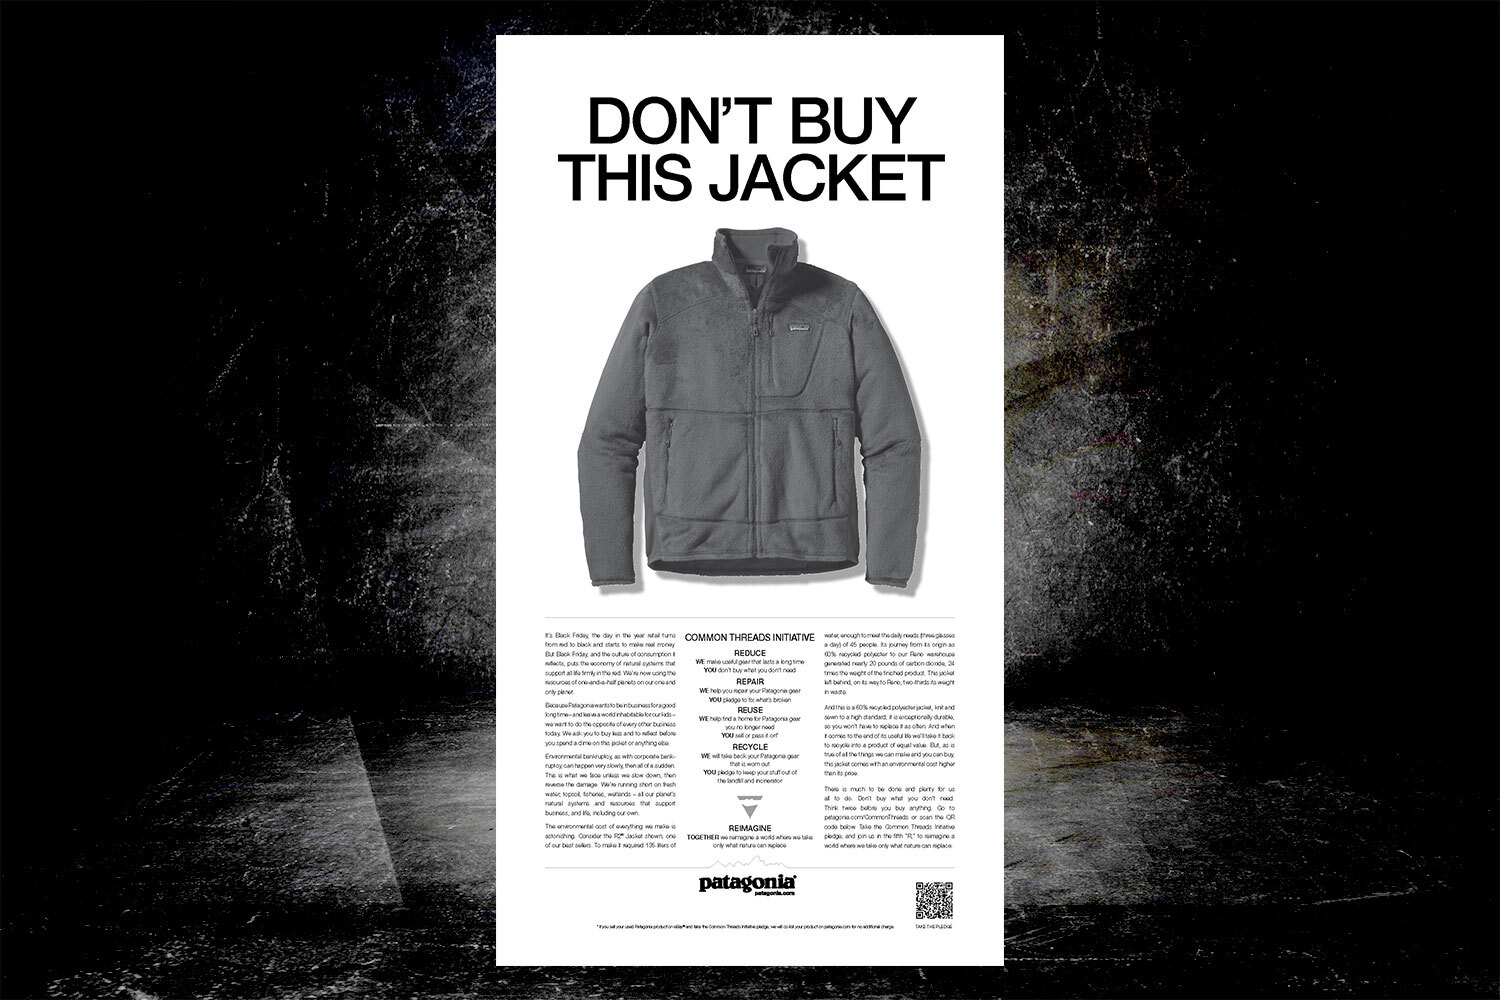 Patagonia's 2011 Black Friday ad in The New York Times that reads "Don't Buy This Jacket"